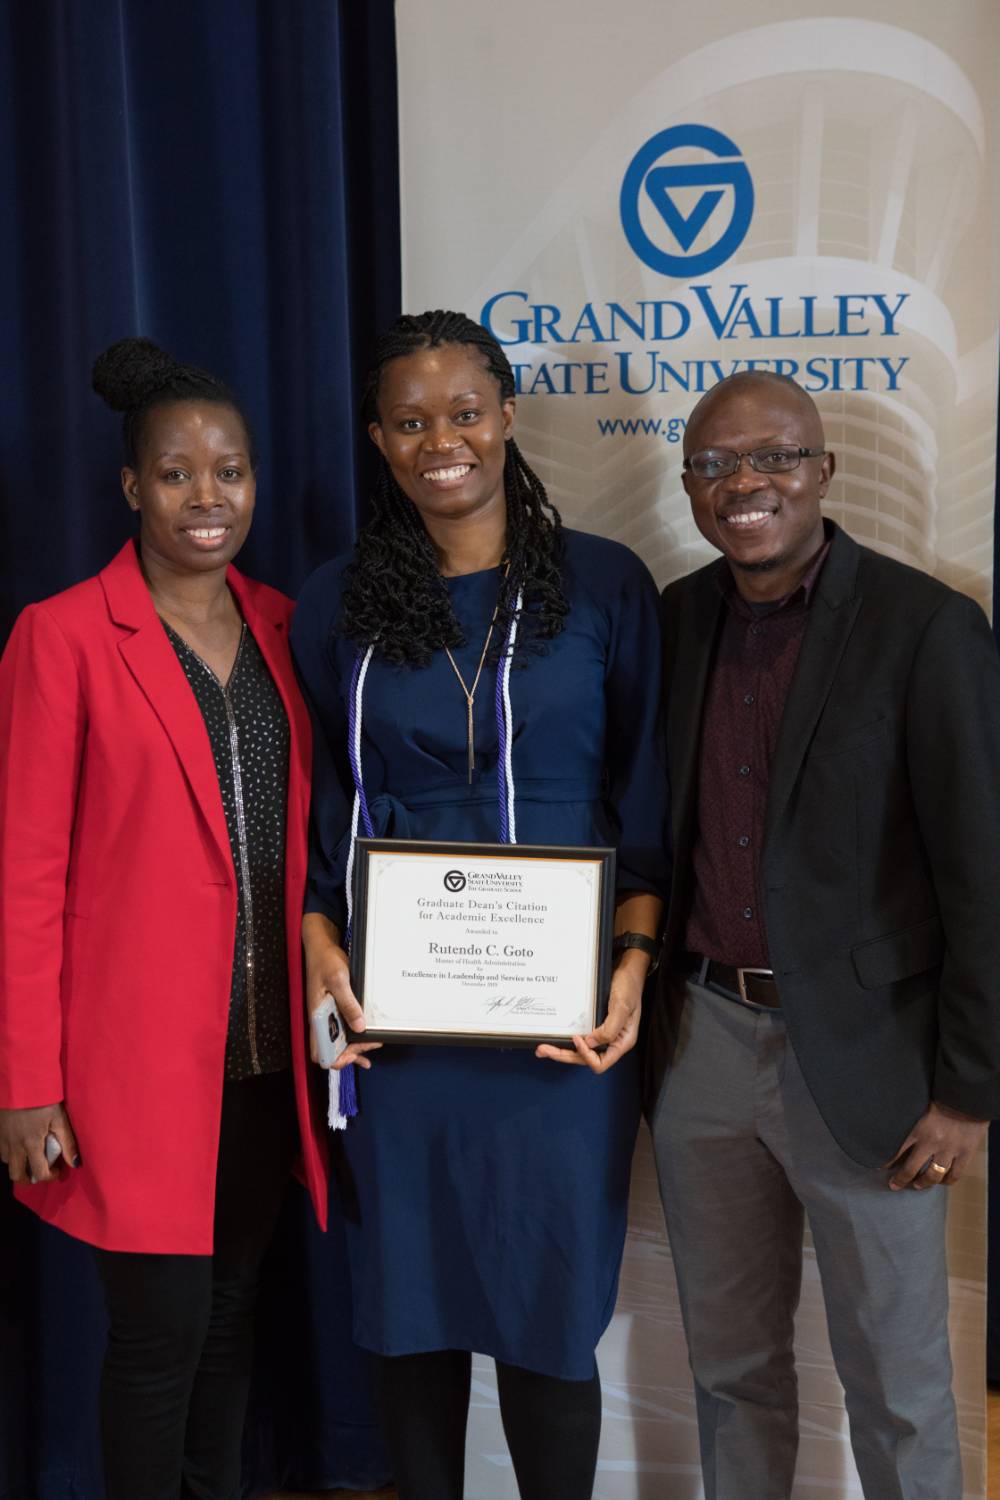 Graduate student holding her award with her parents on either side of her